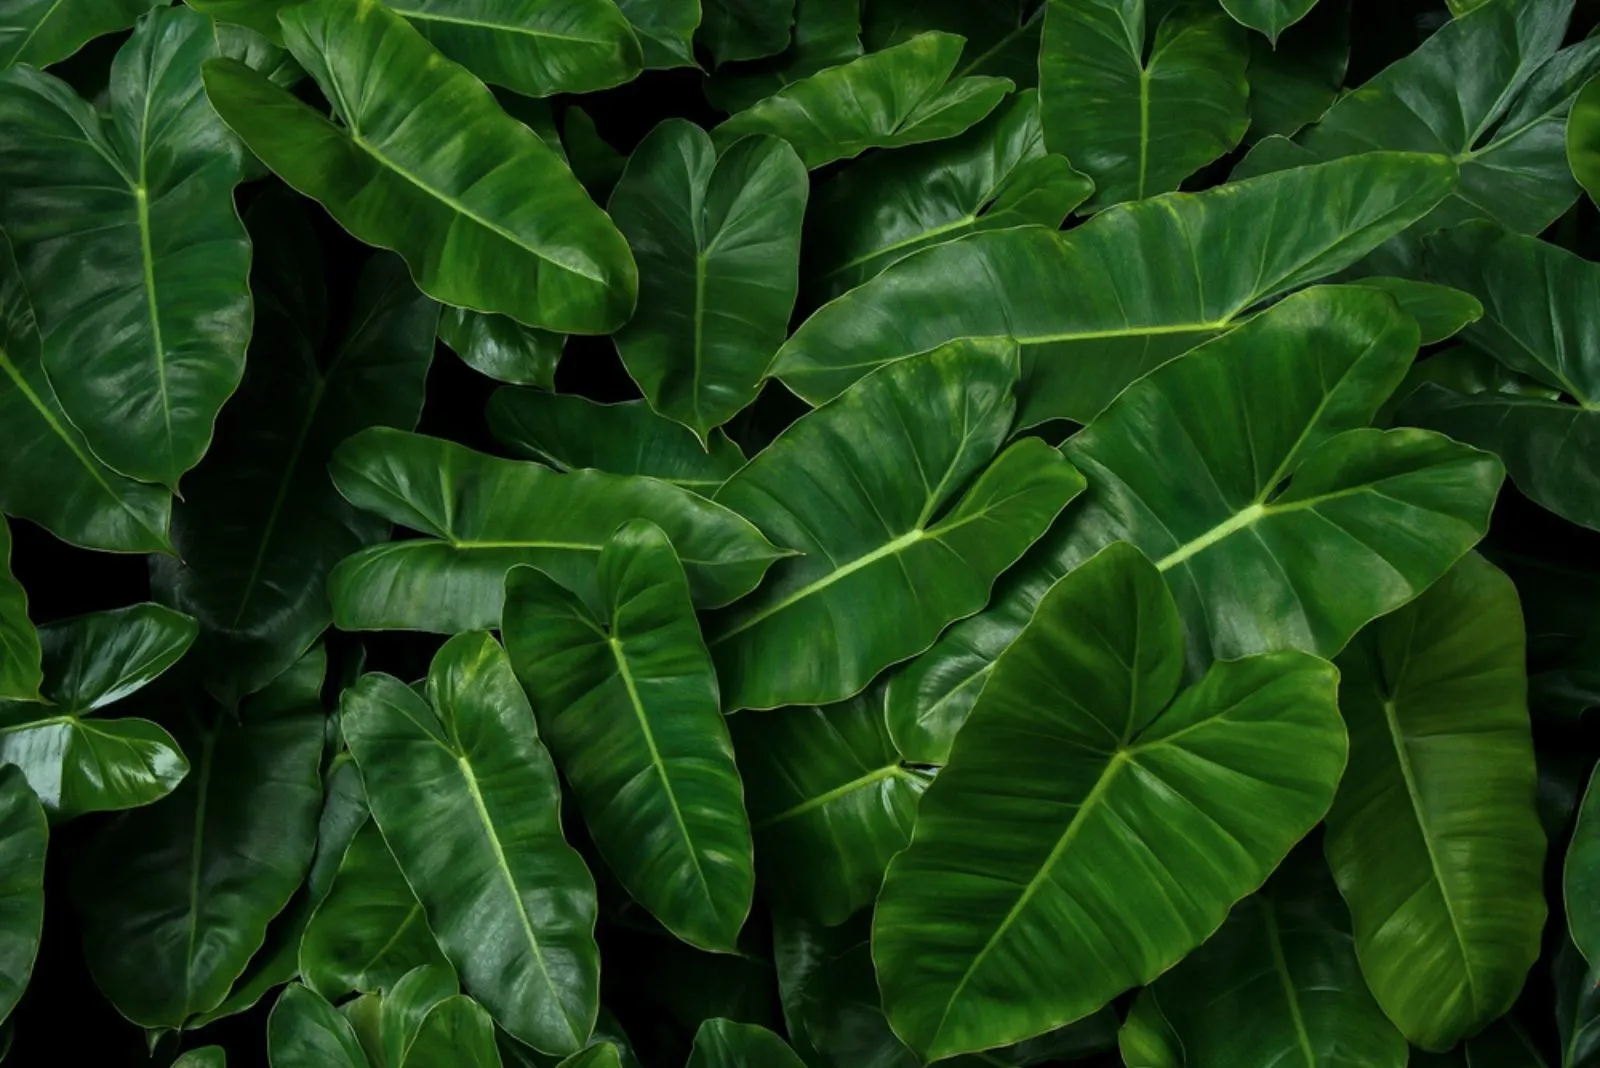 Heart-shaped green leaves texture of Burle Marx philodendron